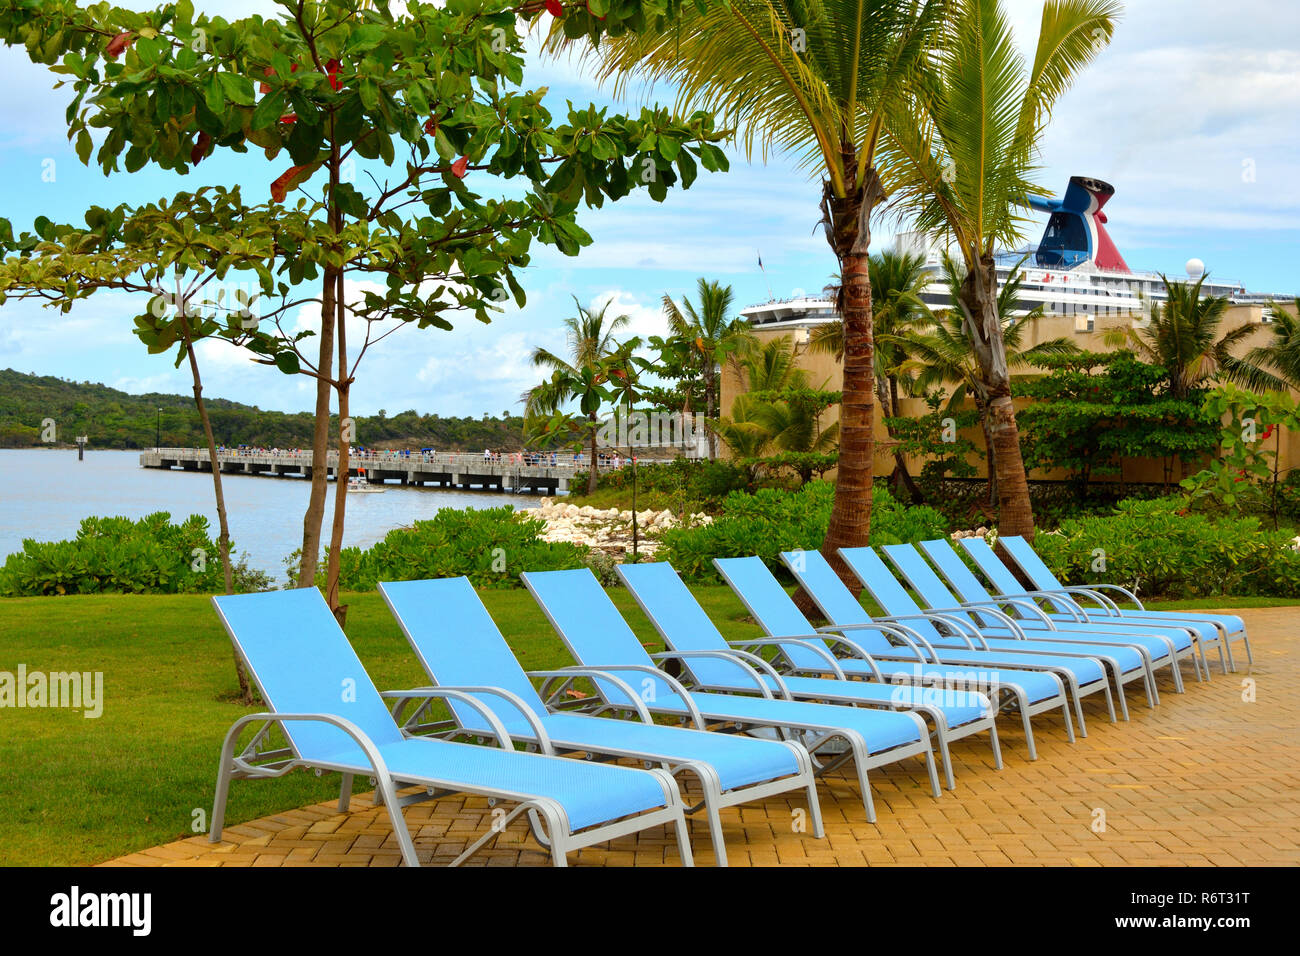 Carnival Splendor is docked behind empty lounge chairs awaiting passengers at Amber Cover, the cruise lines privately owned port. Stock Photo